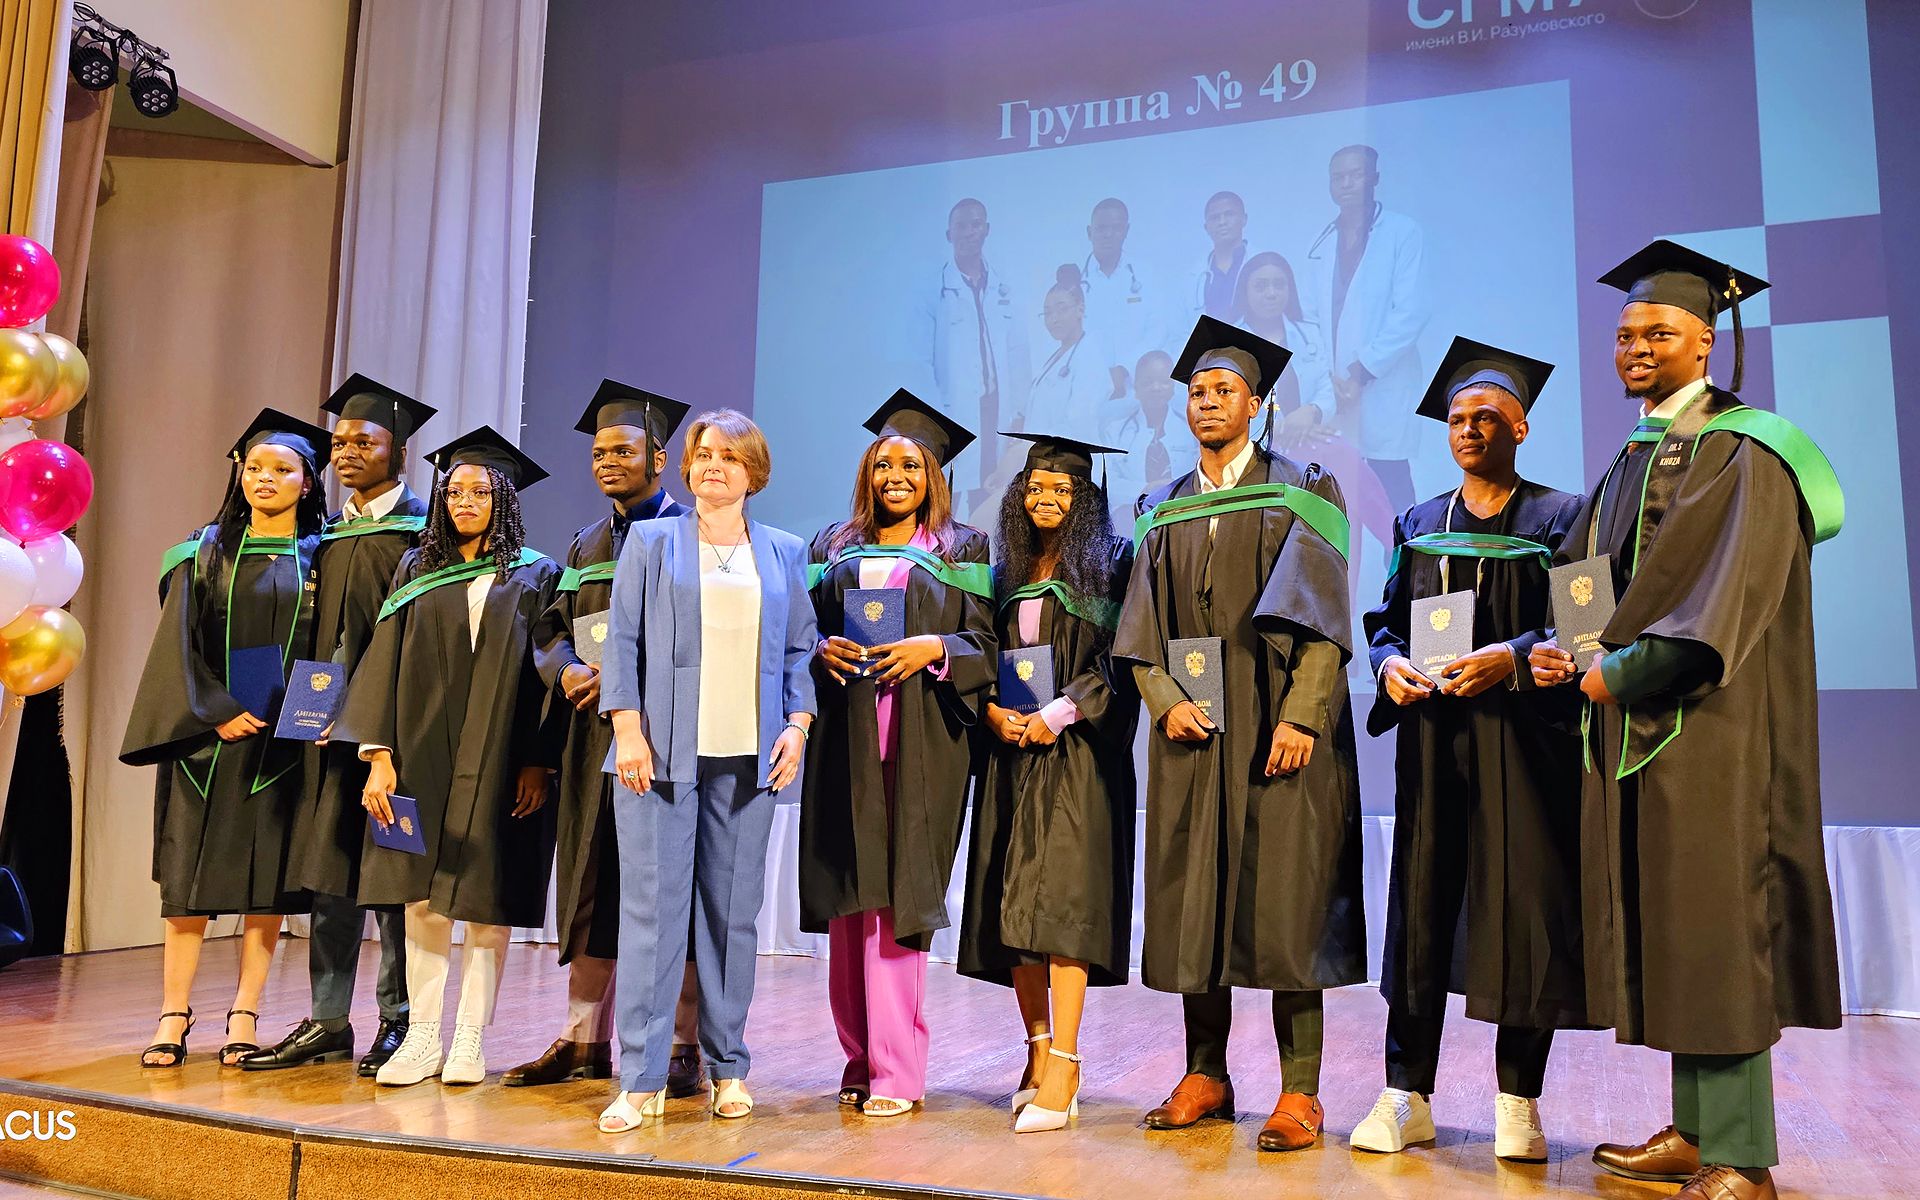 On June 28, 2023, a solemn ceremony of awarding diplomas to foreign students of Saratov State Medical University, one of the leading medical universities in Russia, took place in the Saratov Philharmonic and Assembly Hall. About 1,000 graduates received prestigious diplomas of higher medical education, including 152 graduates from 28 countries of the world; 8 graduates were awarded diplomas with distinction.